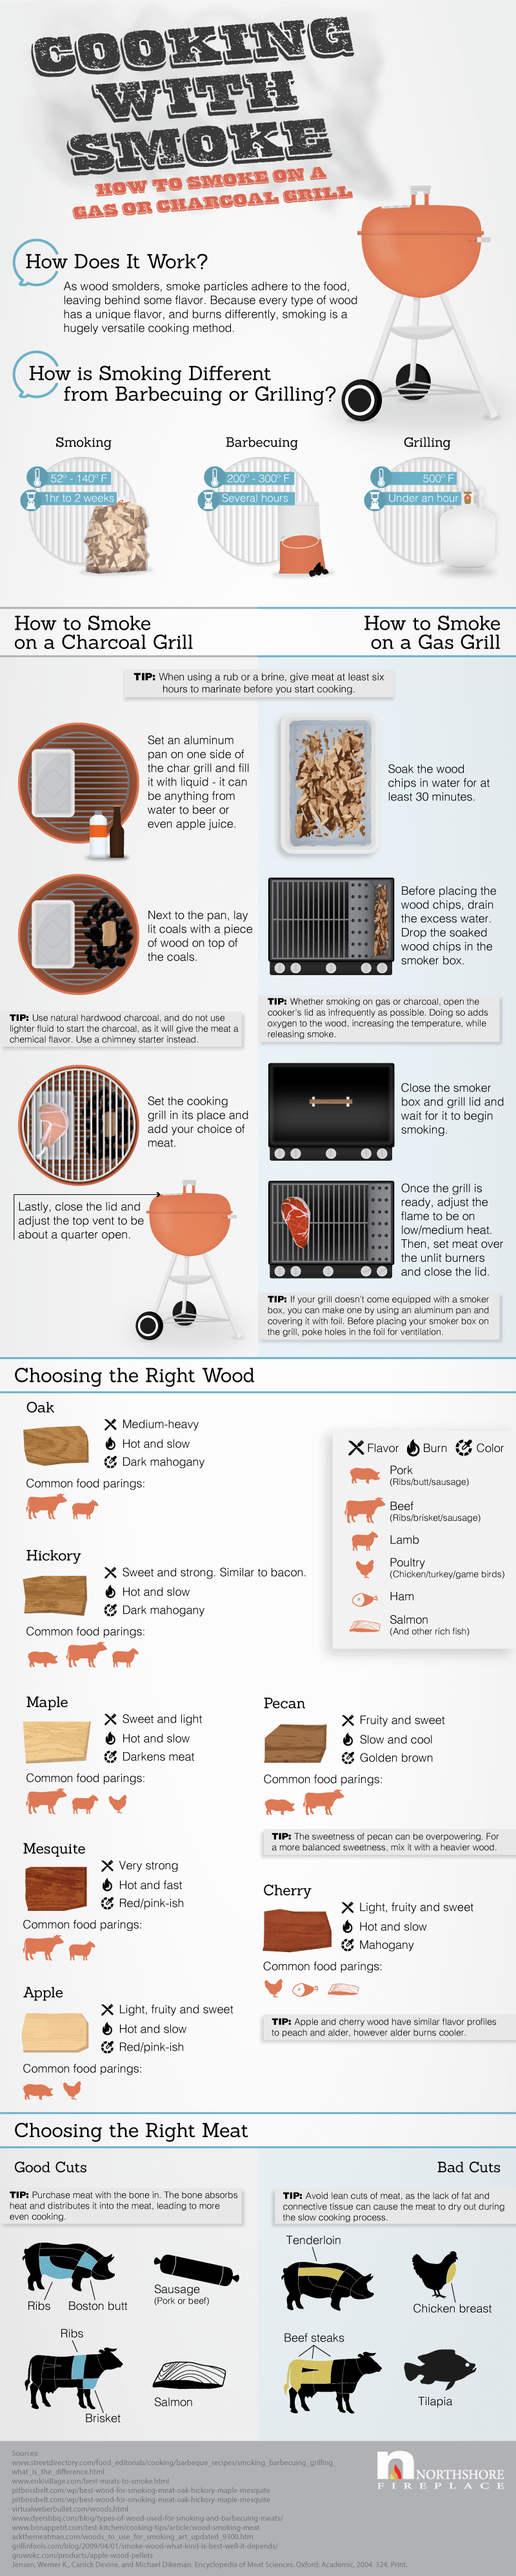 how to smoke food on a grill, select meats for smoking, and choose the right wood